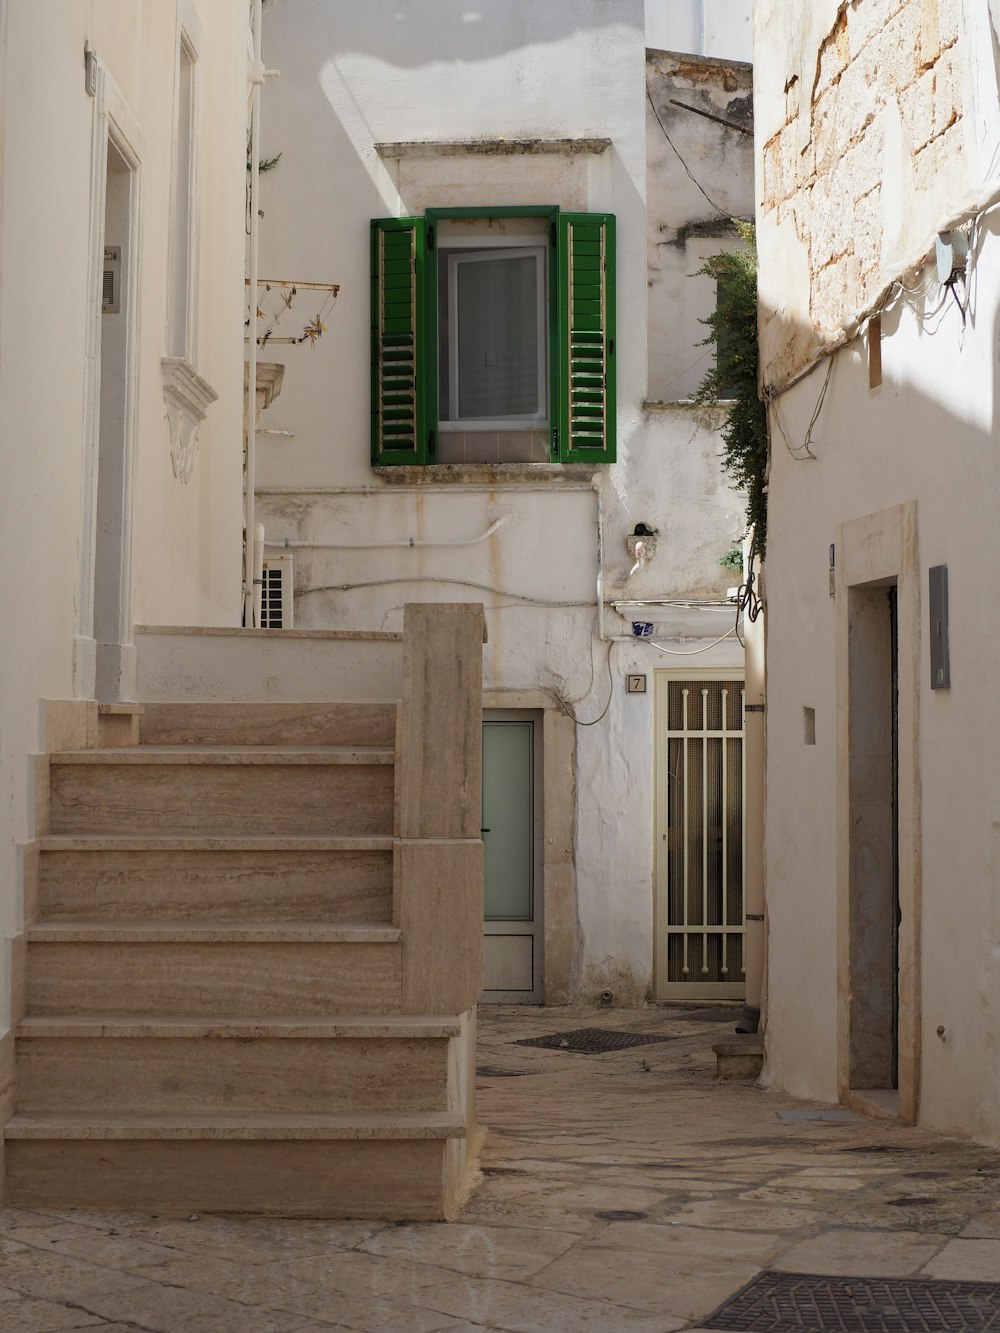 a set of stairs leading to a green window